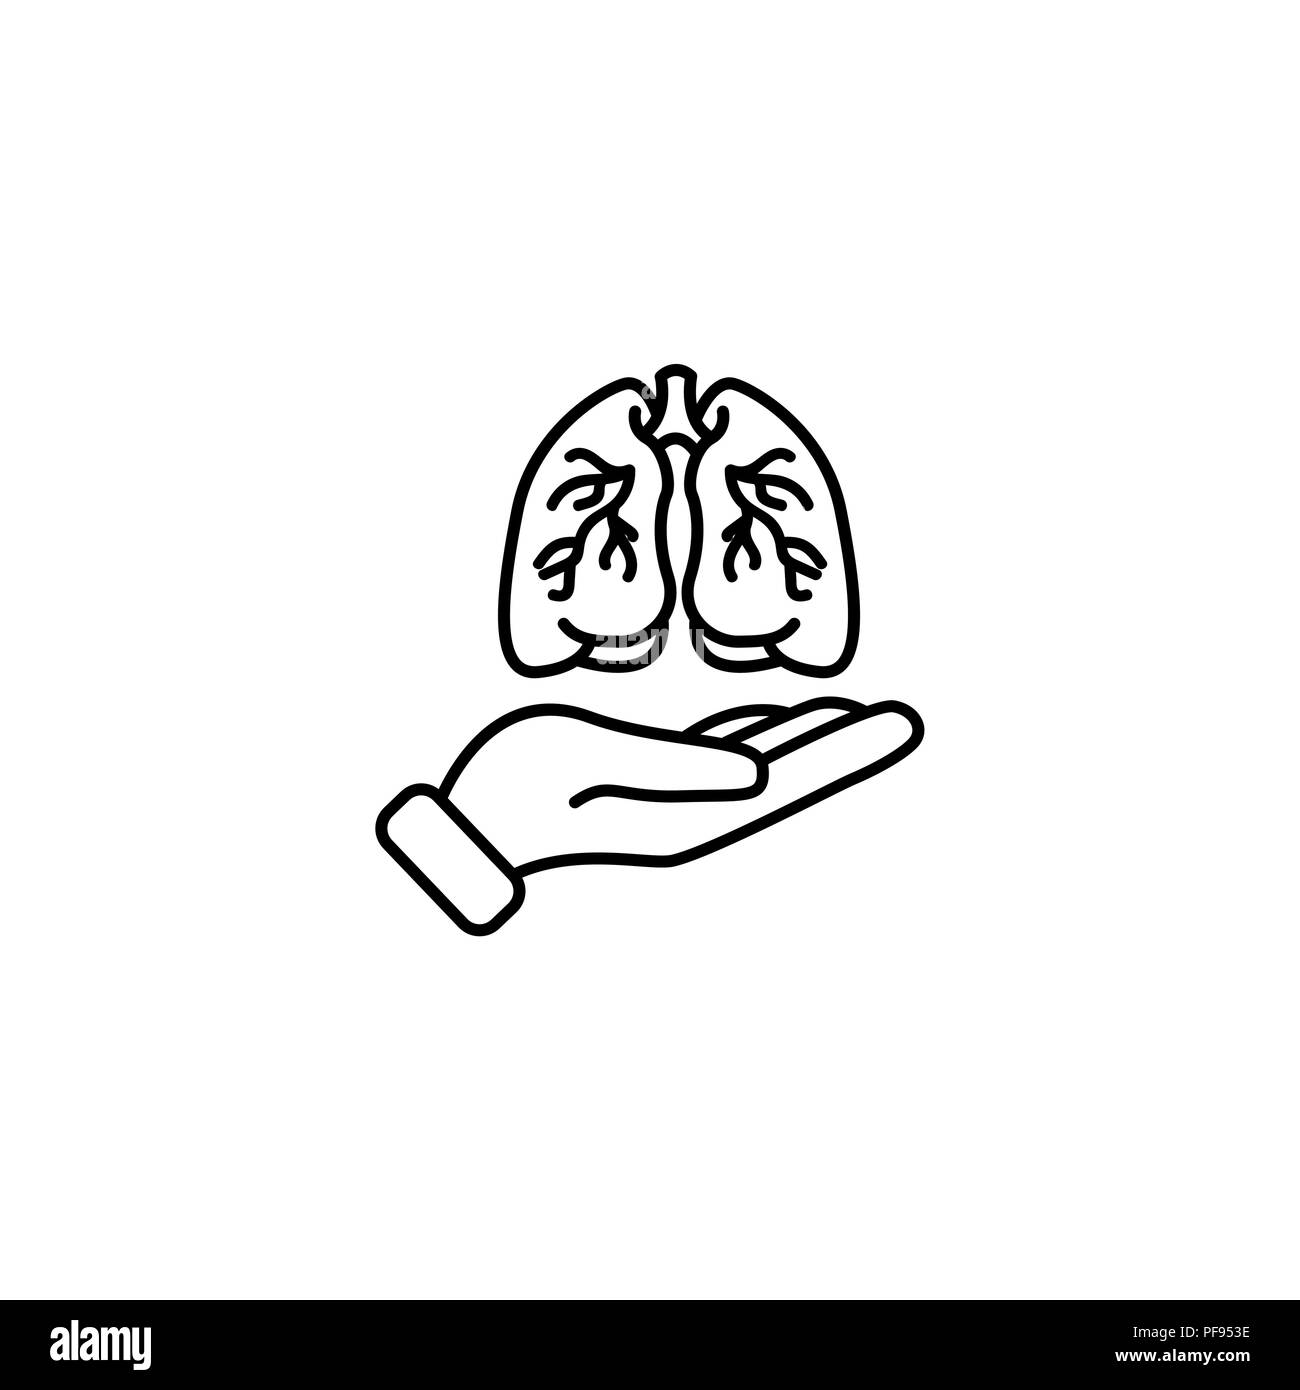 Web line icon. Lungs in hand black on white background Stock Vector